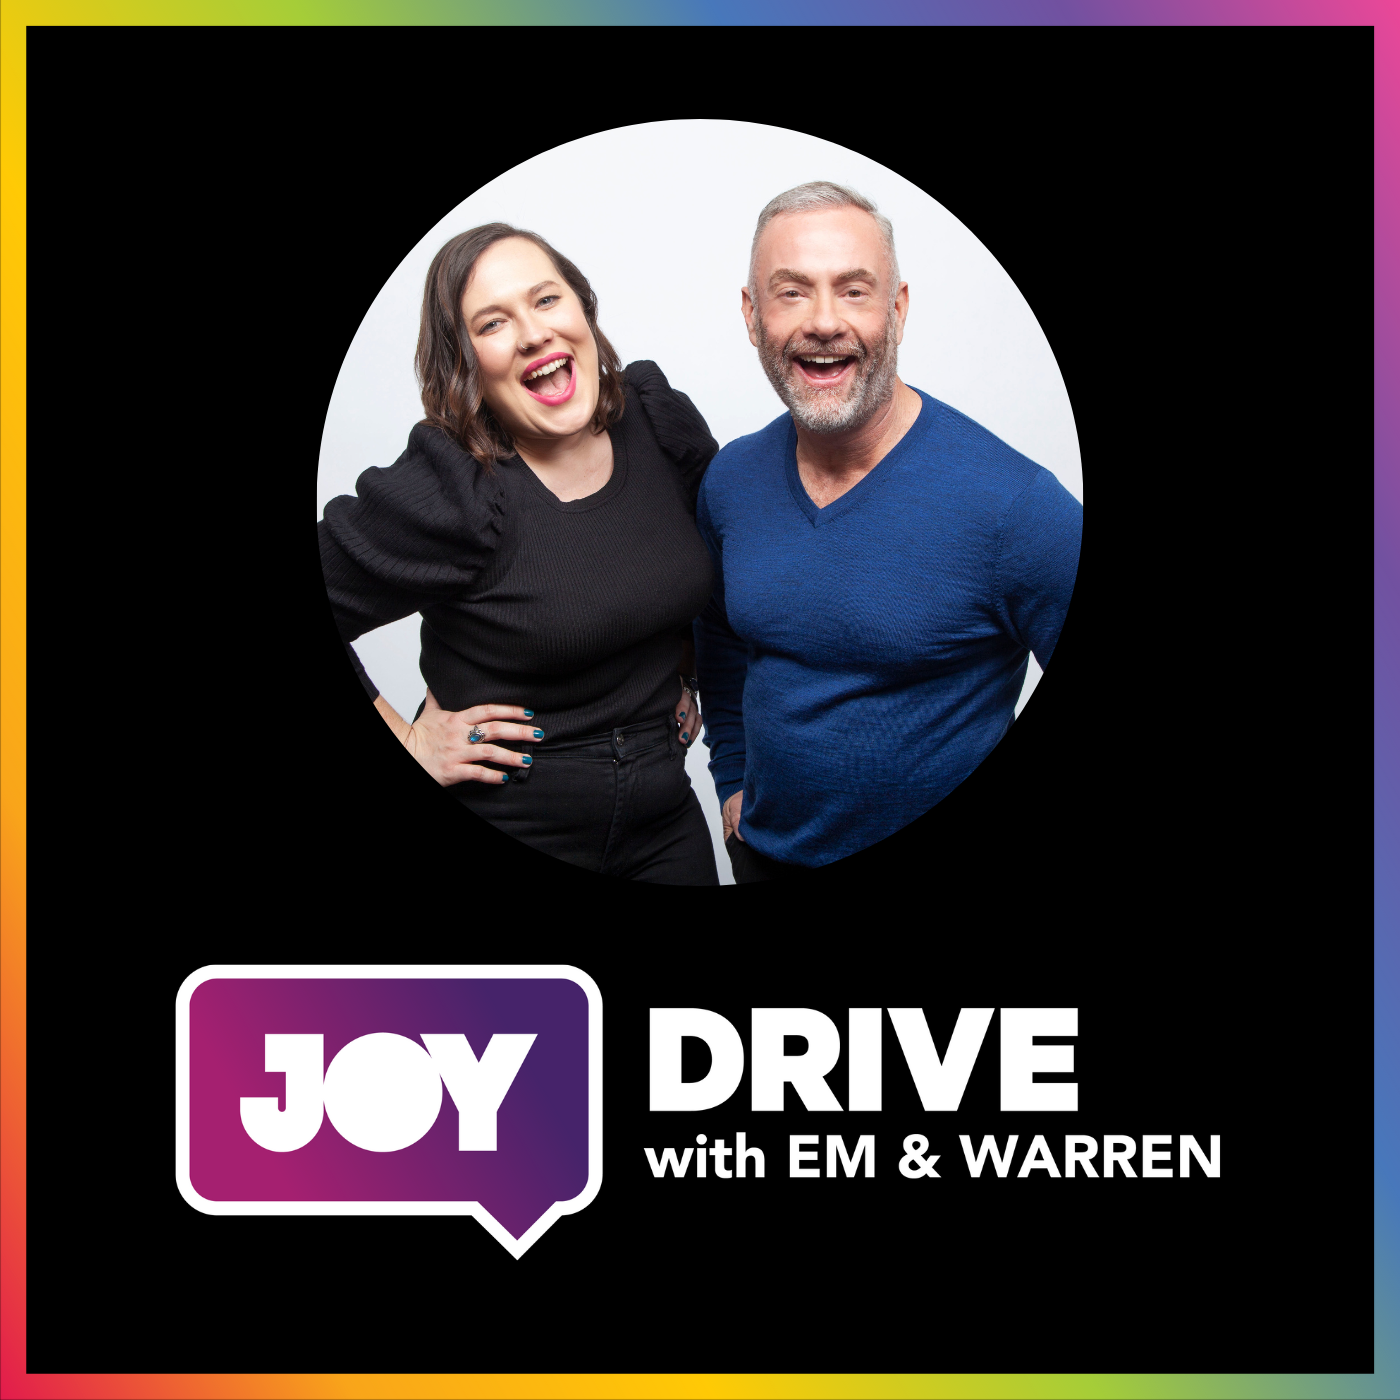 Amy Peden x JOY Drive: Staying Safe in the Water